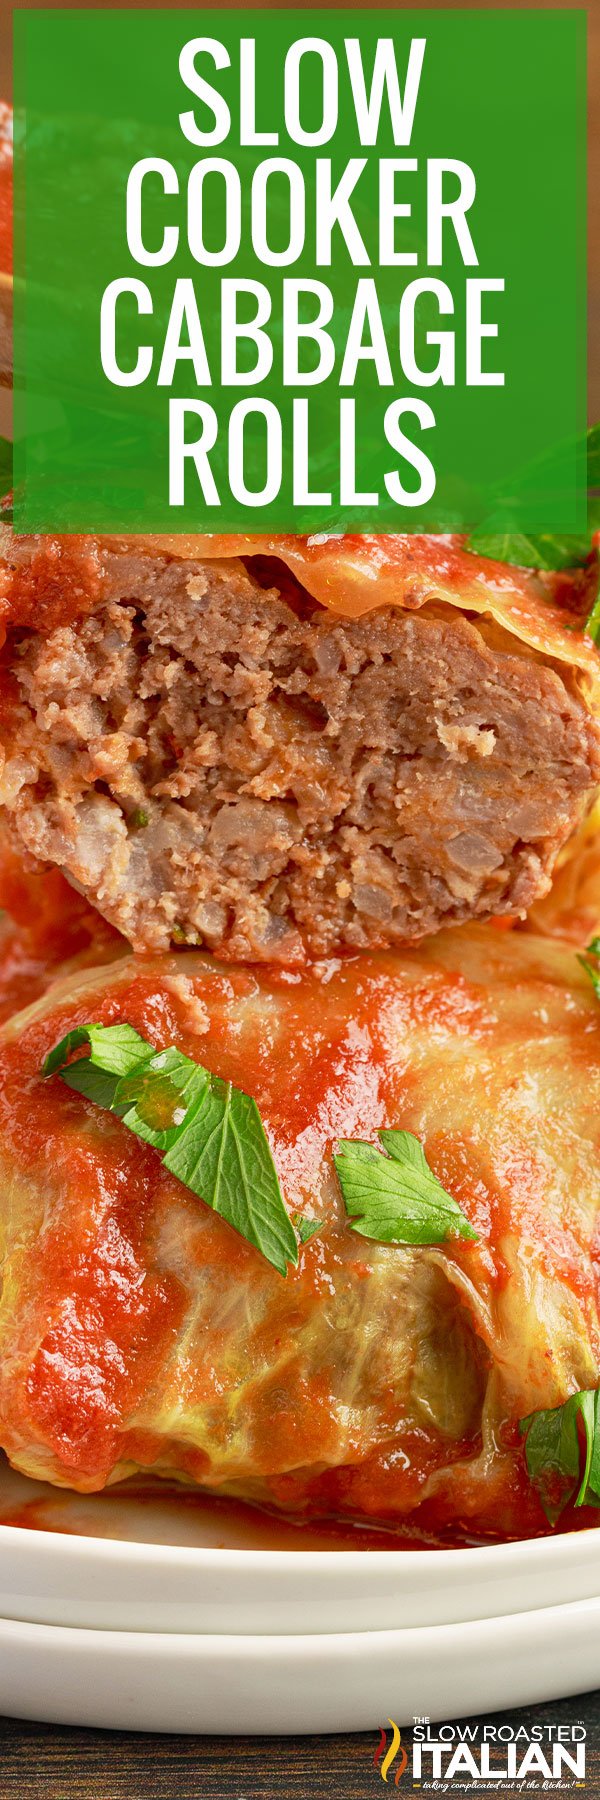 titled collage for slow cooker cabbage rolls recipe